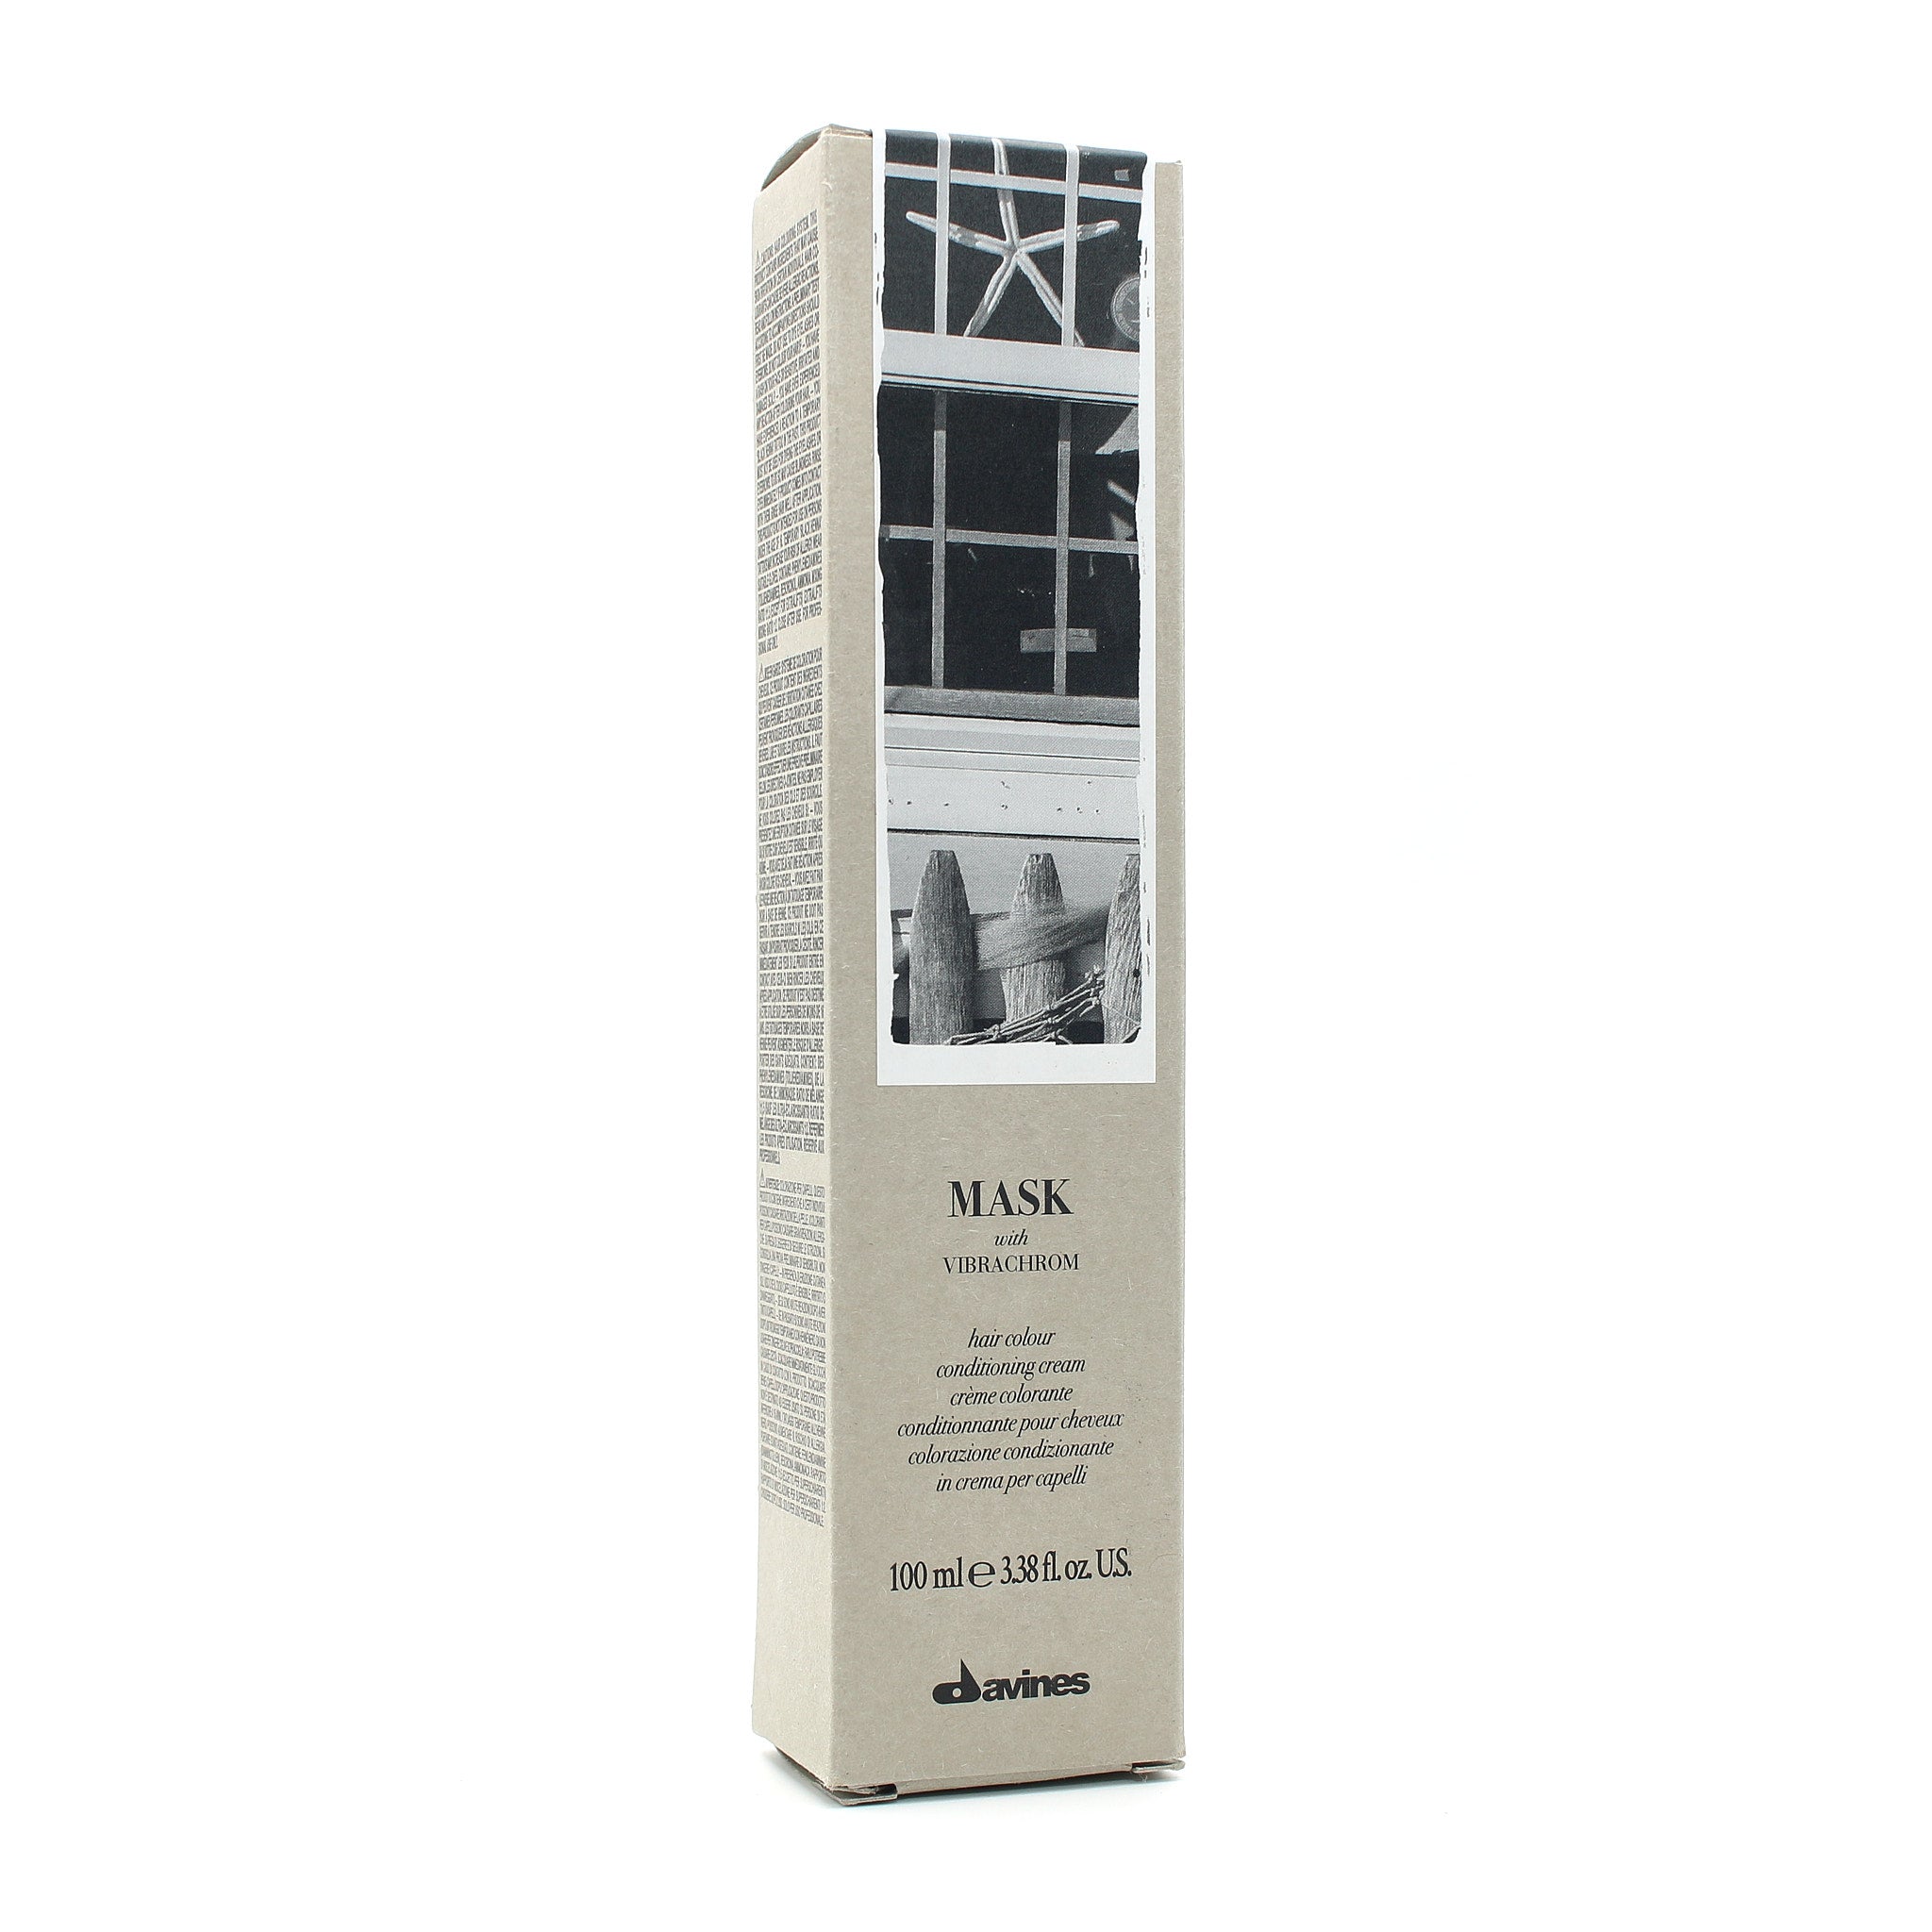 DAVINES Mask with Vibracrom 6,0 Hair Color Conditioning Cream 3.38 oz